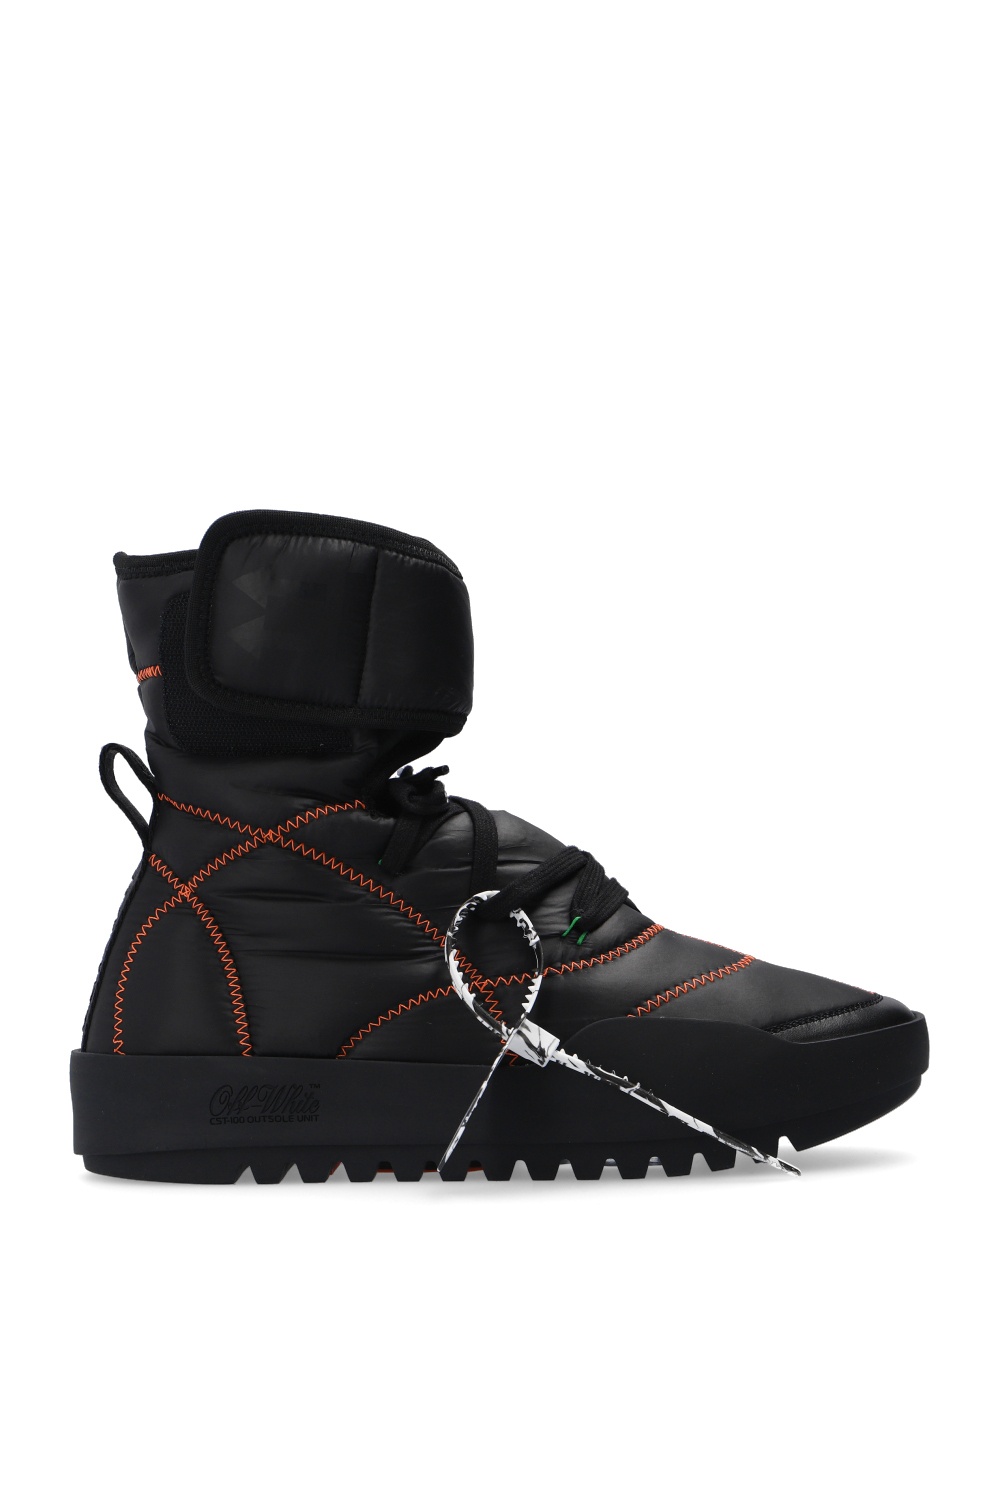 off white steel toe shoes